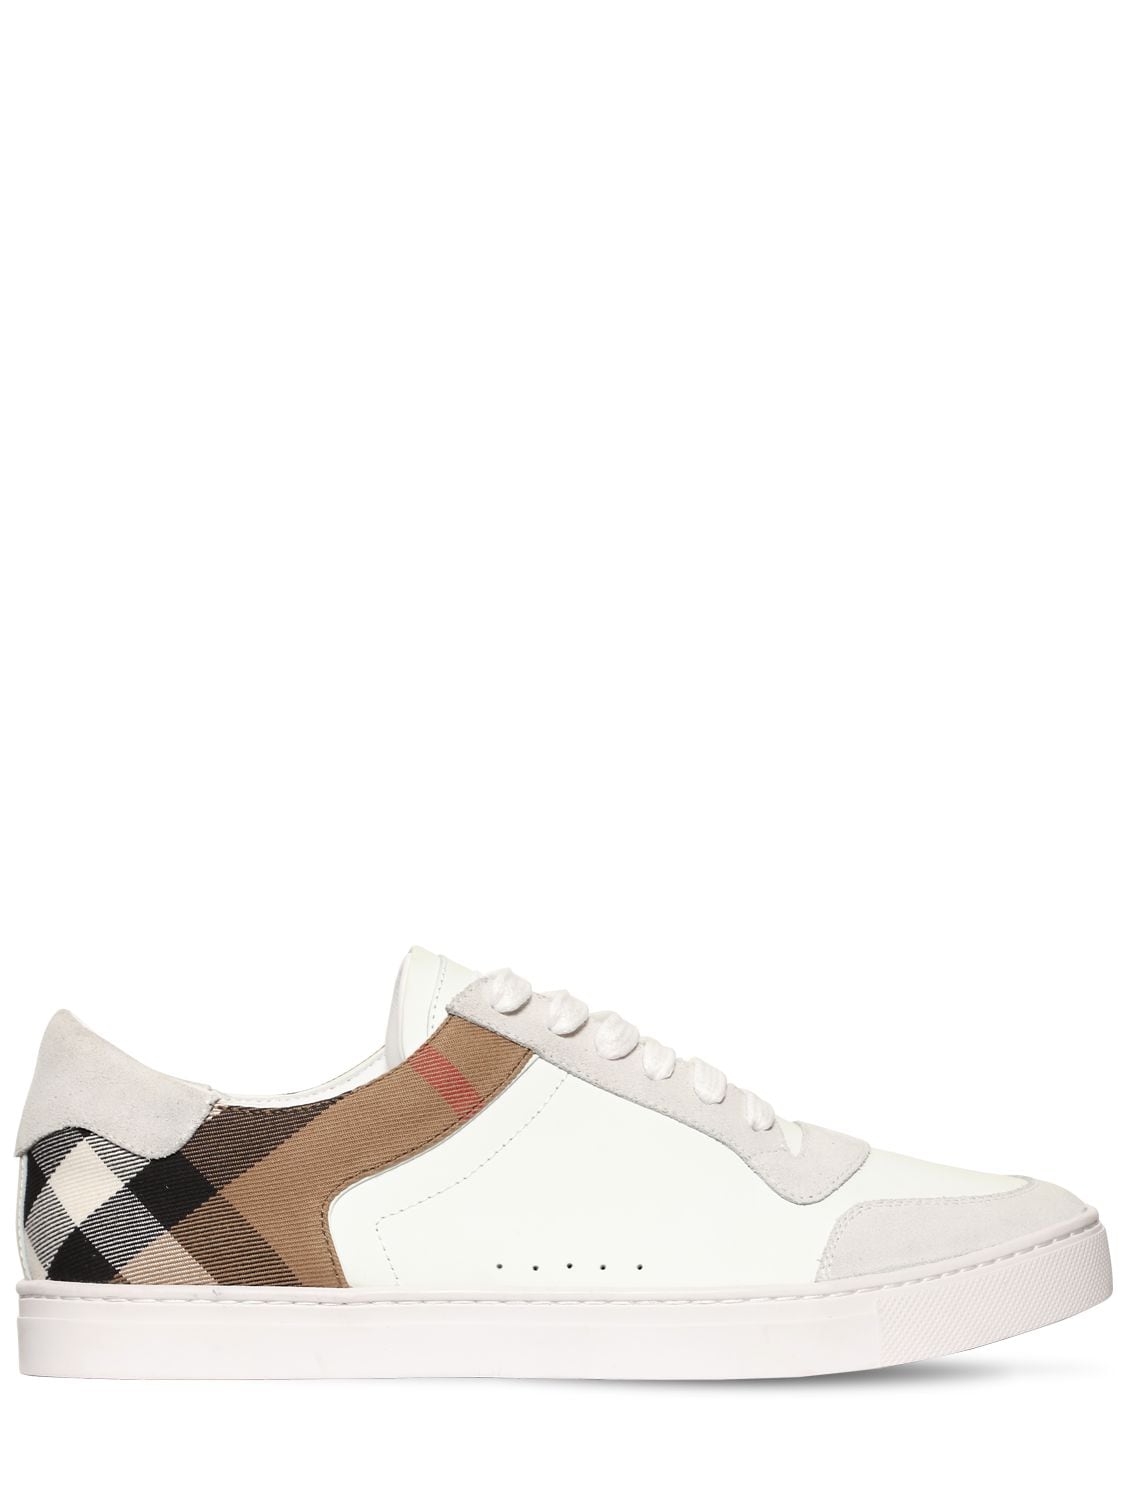 Burberry Newport Check Canvas & Leather Sneakers In Optic White